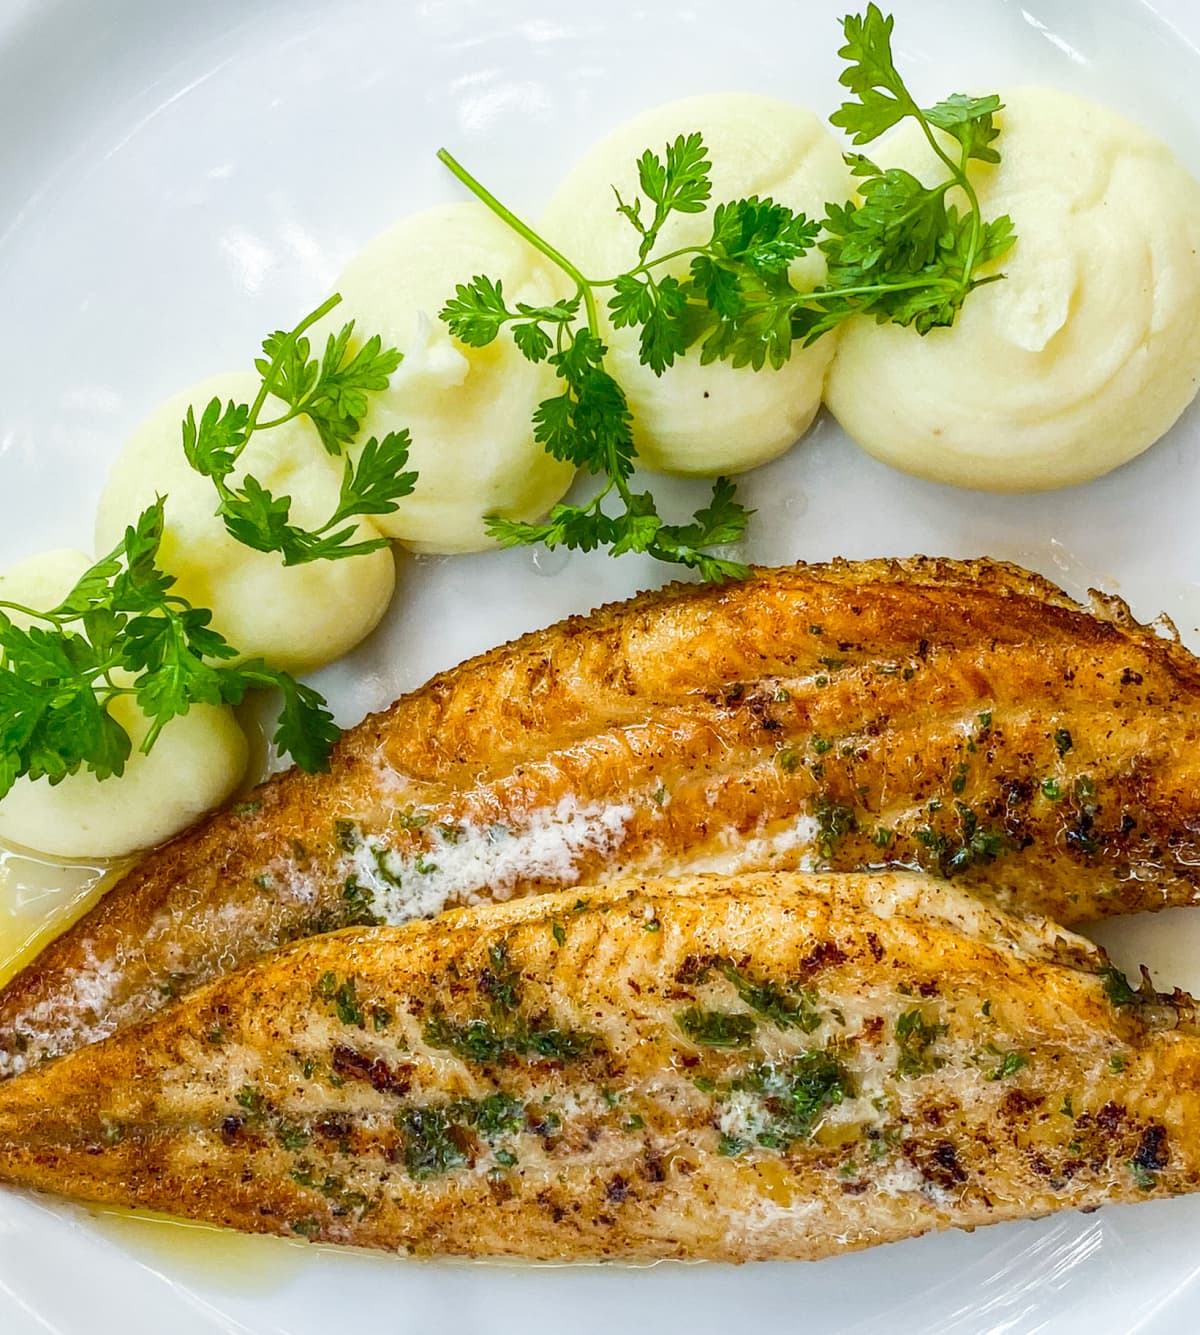 Sole Meuniere, the classic French fish dish of dover sole sauteed in brown butter.